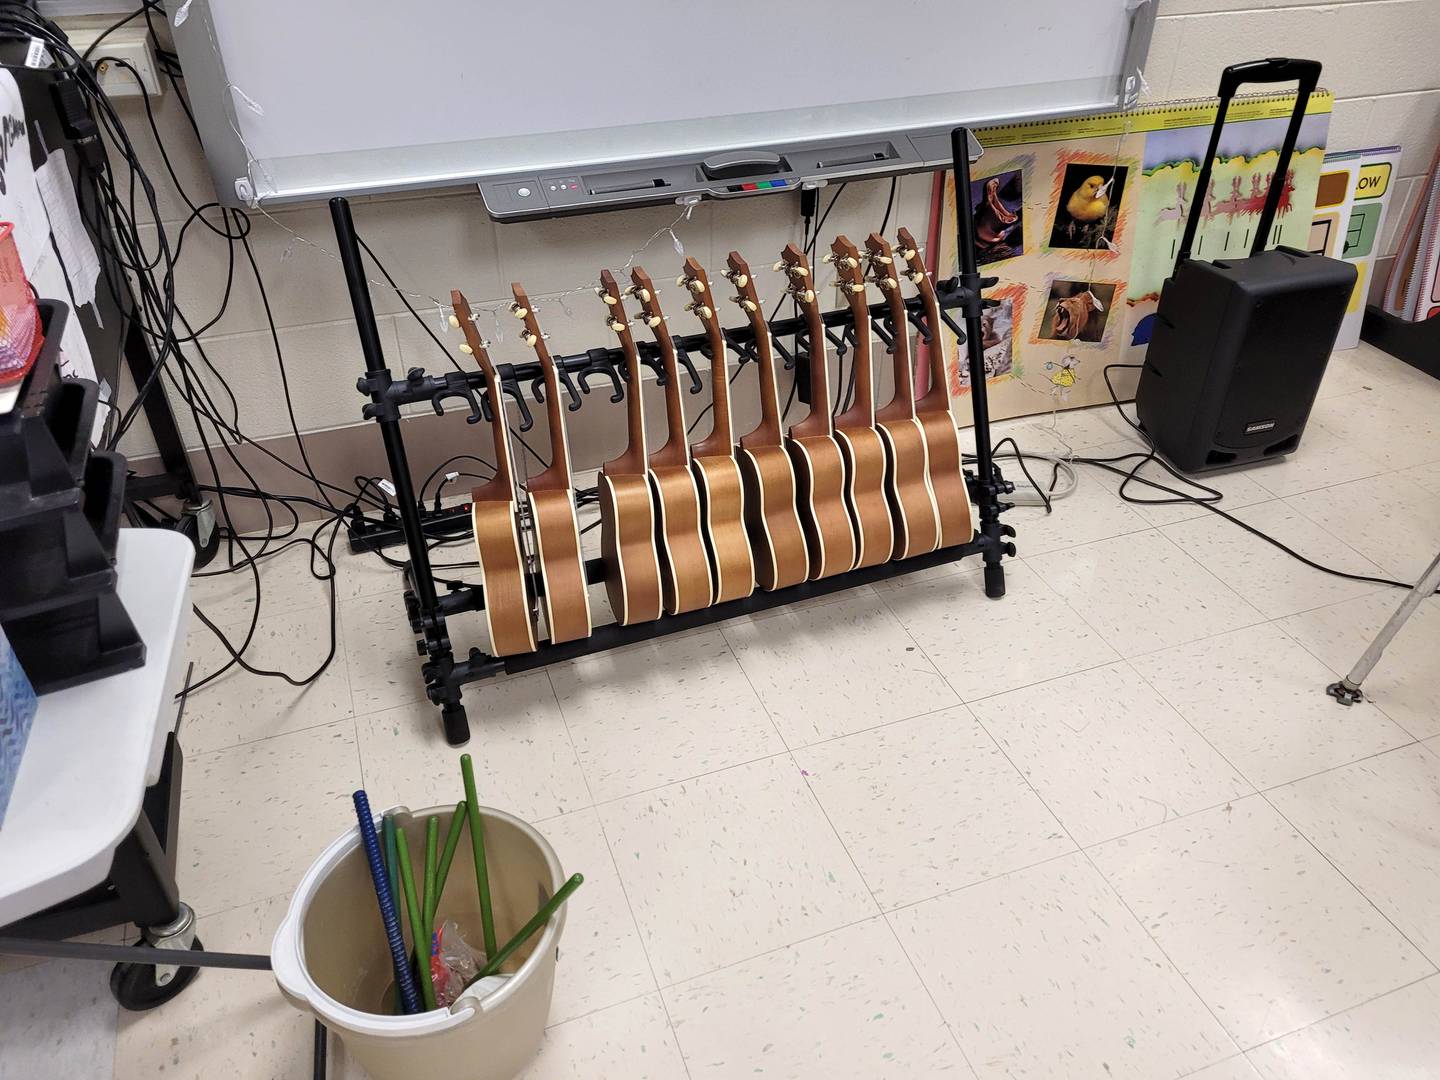 Ukuleles and other instruments sit ready to go in Brianne Borgman's music class. Borgman teaches music at Malta and Jefferson elementary schools in DeKalb District 428. (Photo provided by Brianne Borgman)